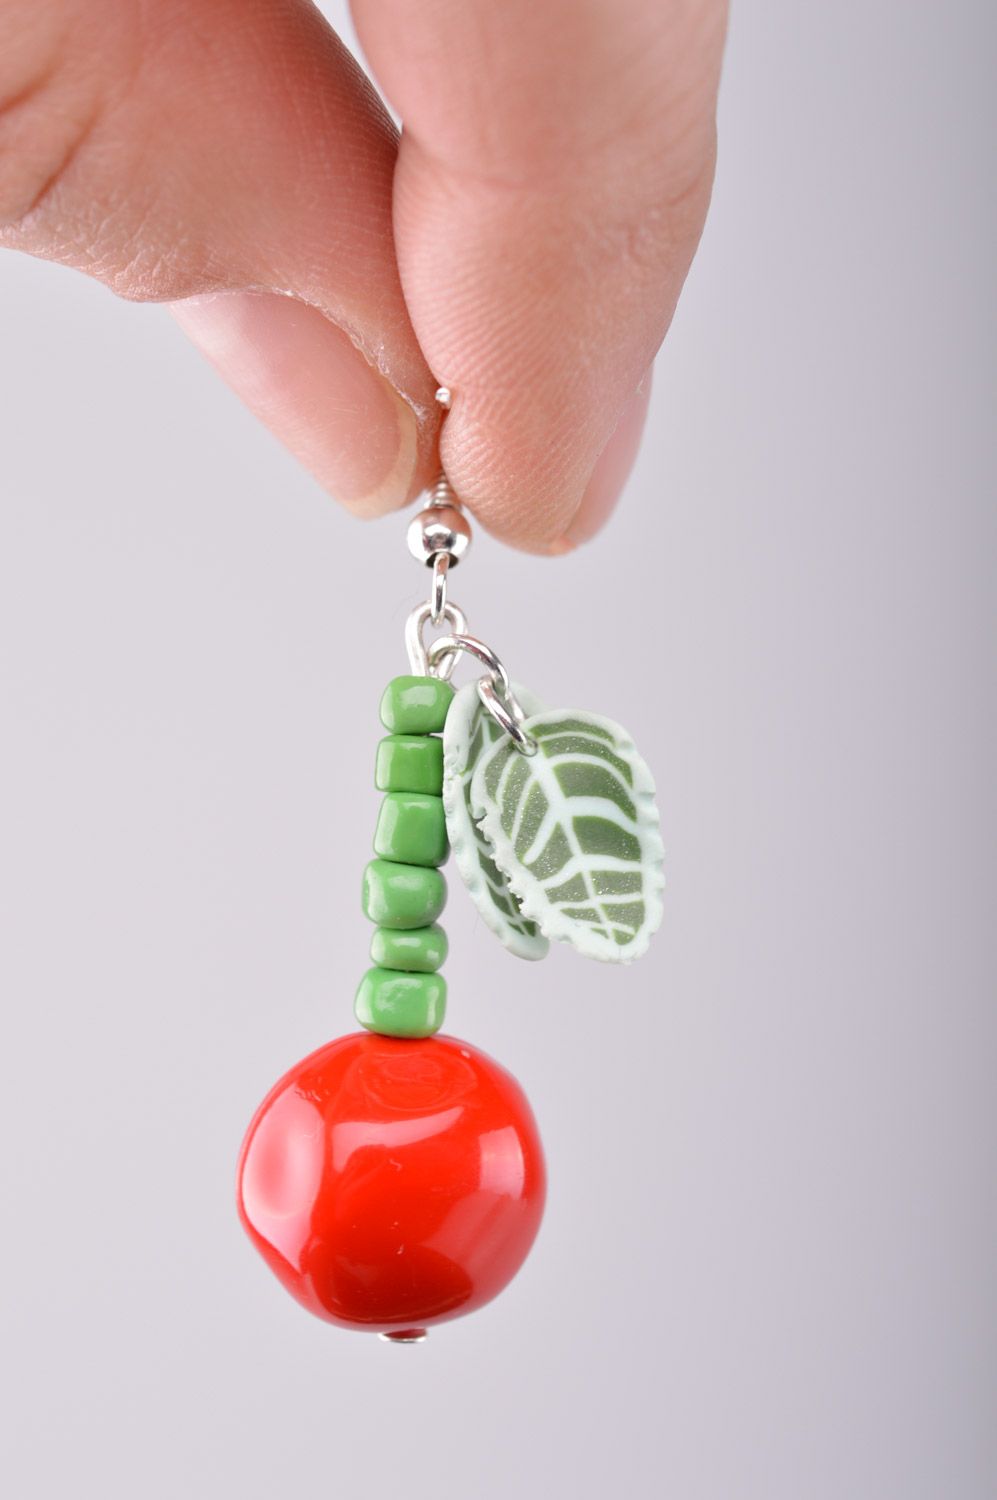 Homemade long polymer clay earrings with charms in the shape of cherries photo 1